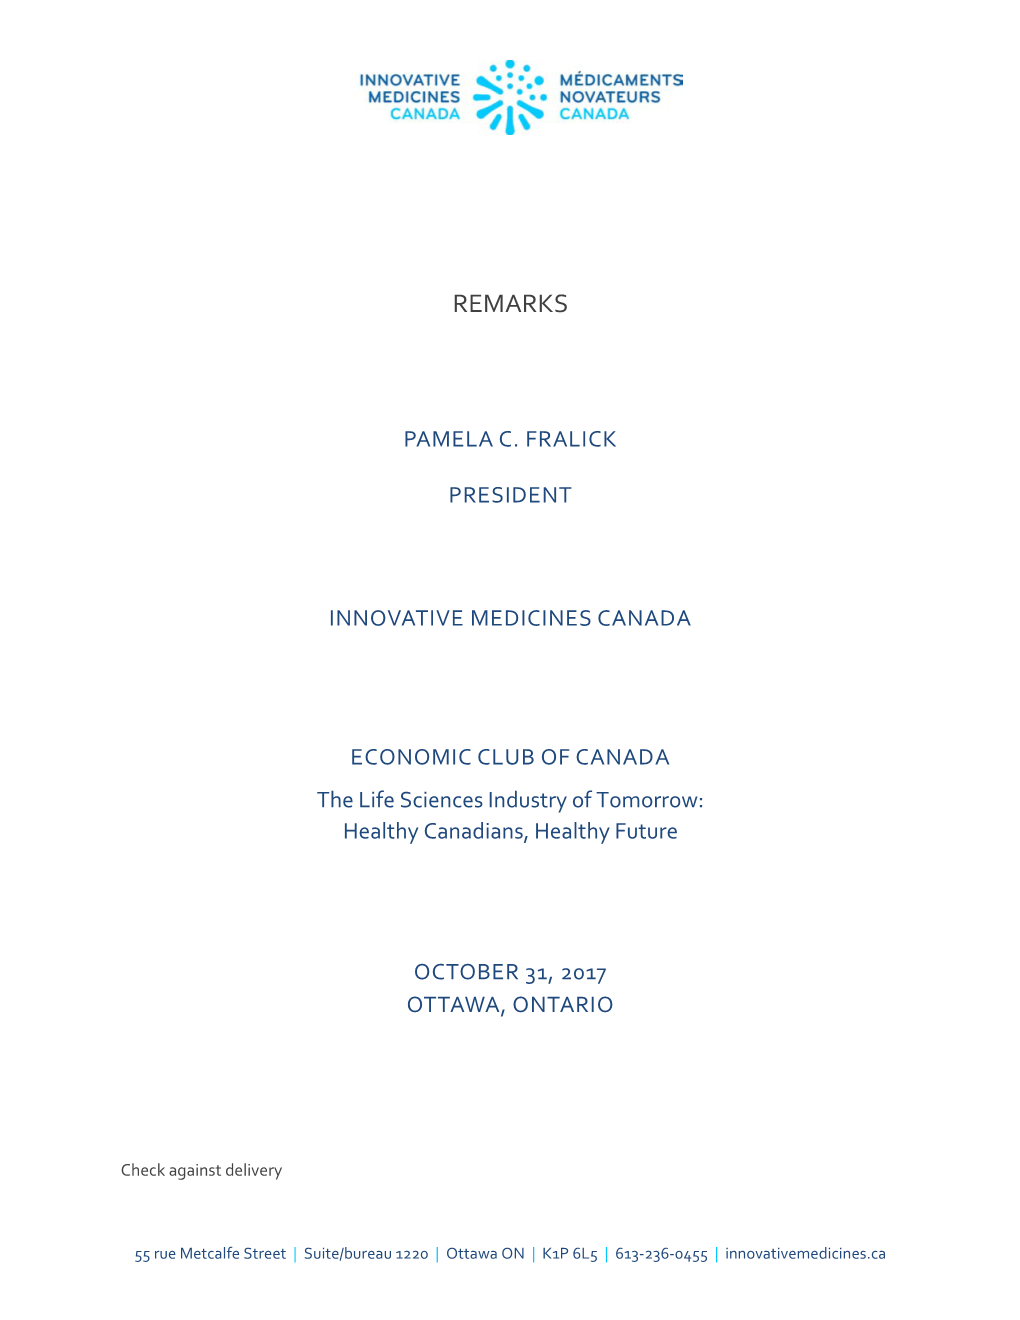 Read the Remarks by Pamela Fralick at the Economic Club of Canada